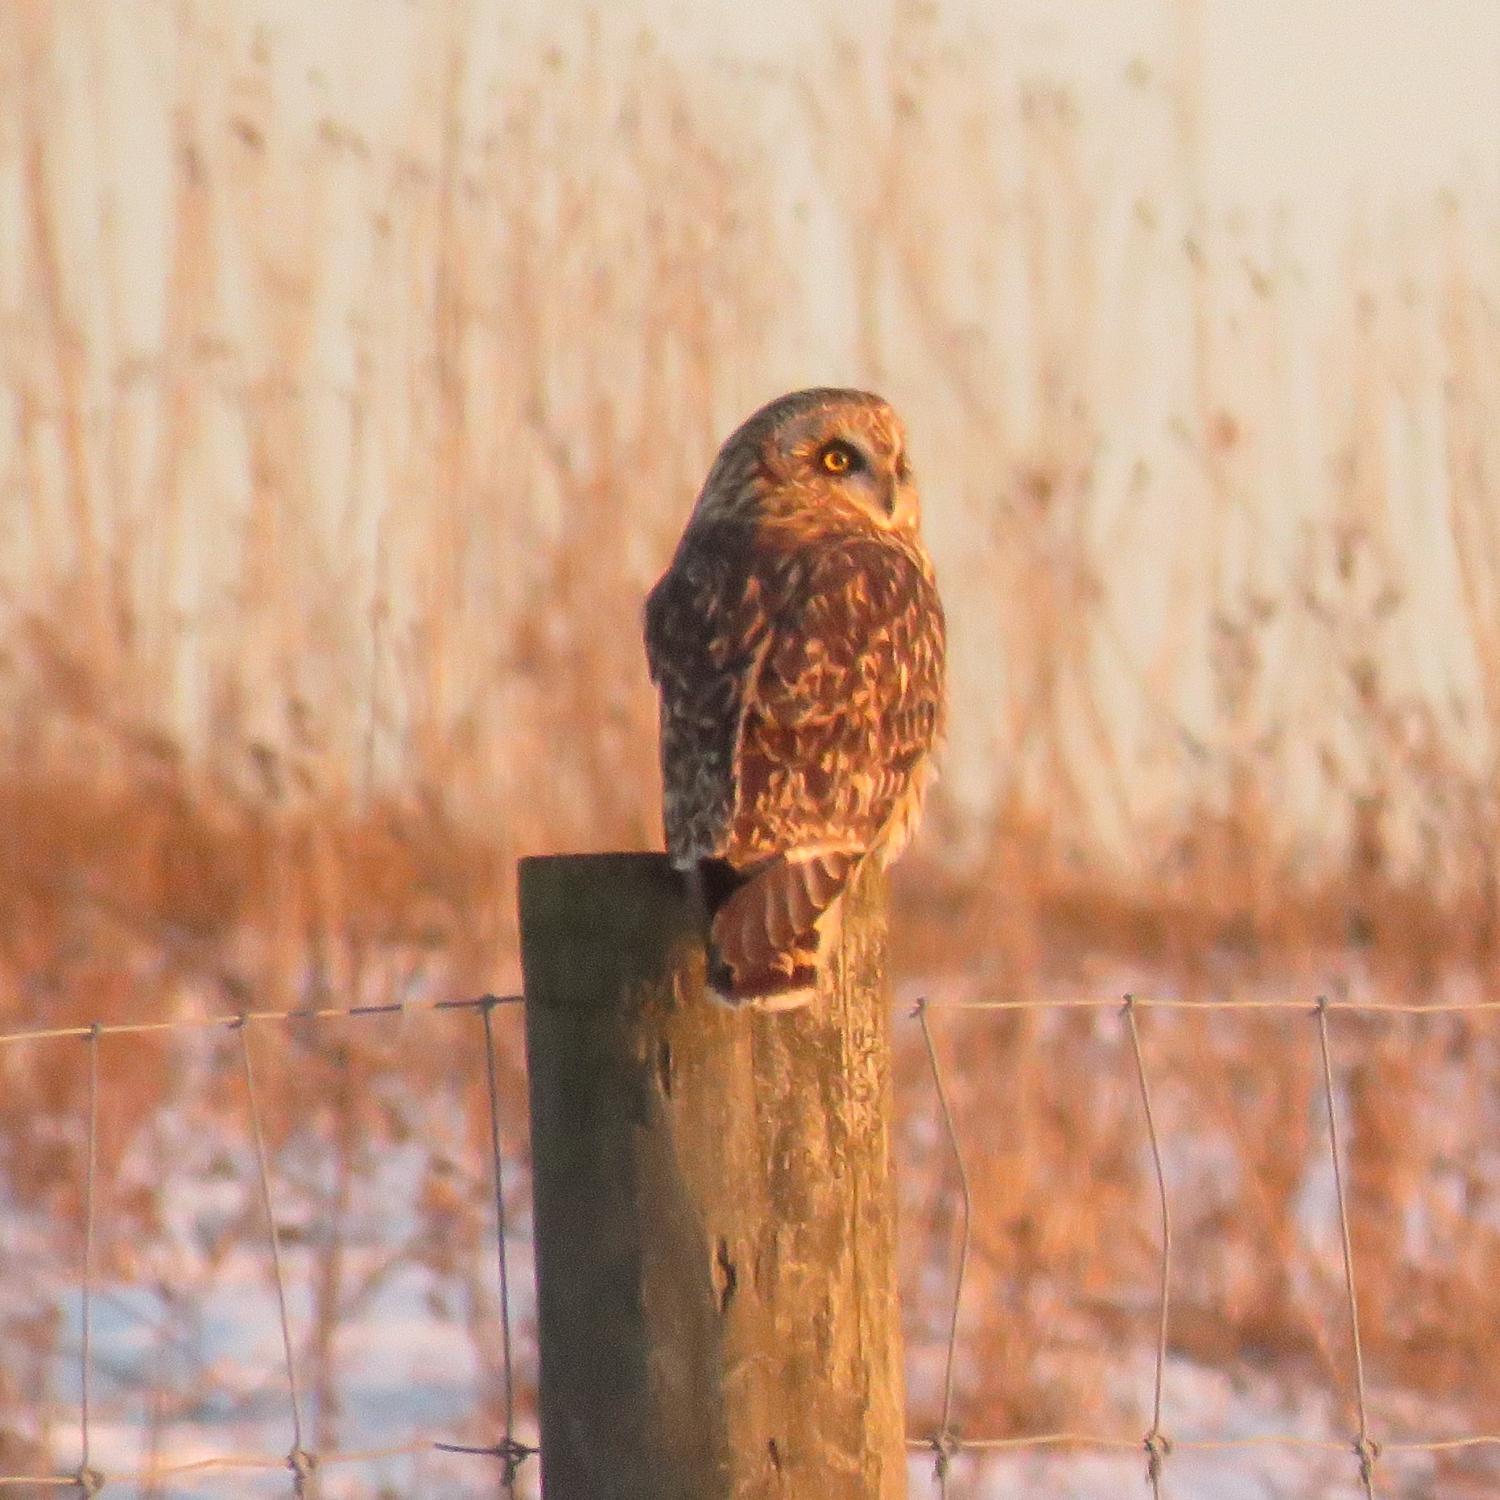 Short-eared owl at The Wilds